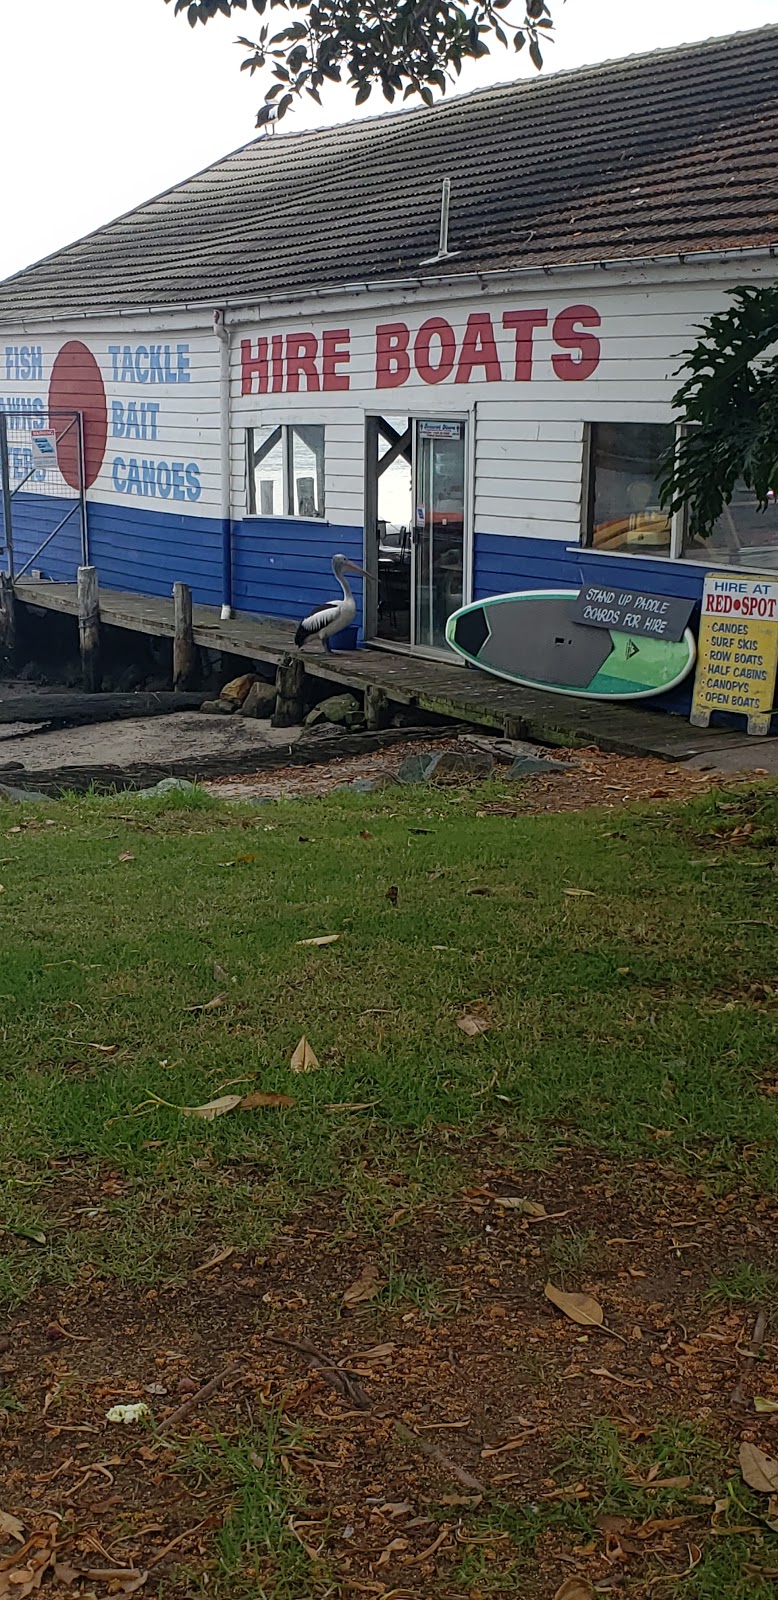 Red Spot Boat Shed | store | 3 Little St., Forster NSW 2428, Australia | 0265547189 OR +61 2 6554 7189